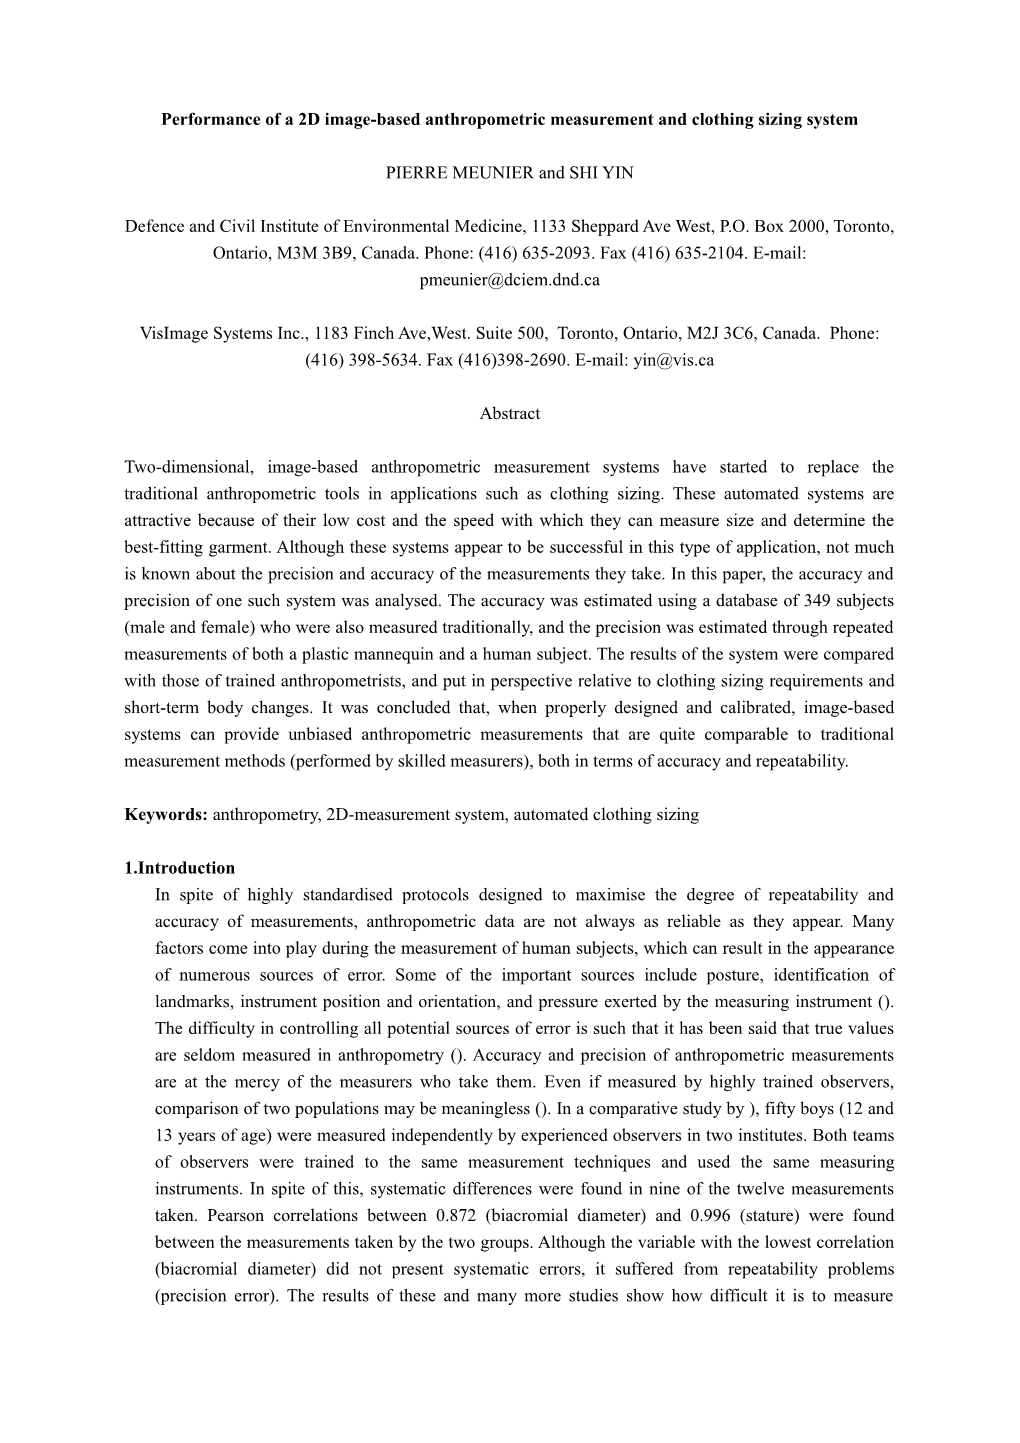 Performance of a 2D Image-Based Anthropometric Measurement and Clothing Sizing System